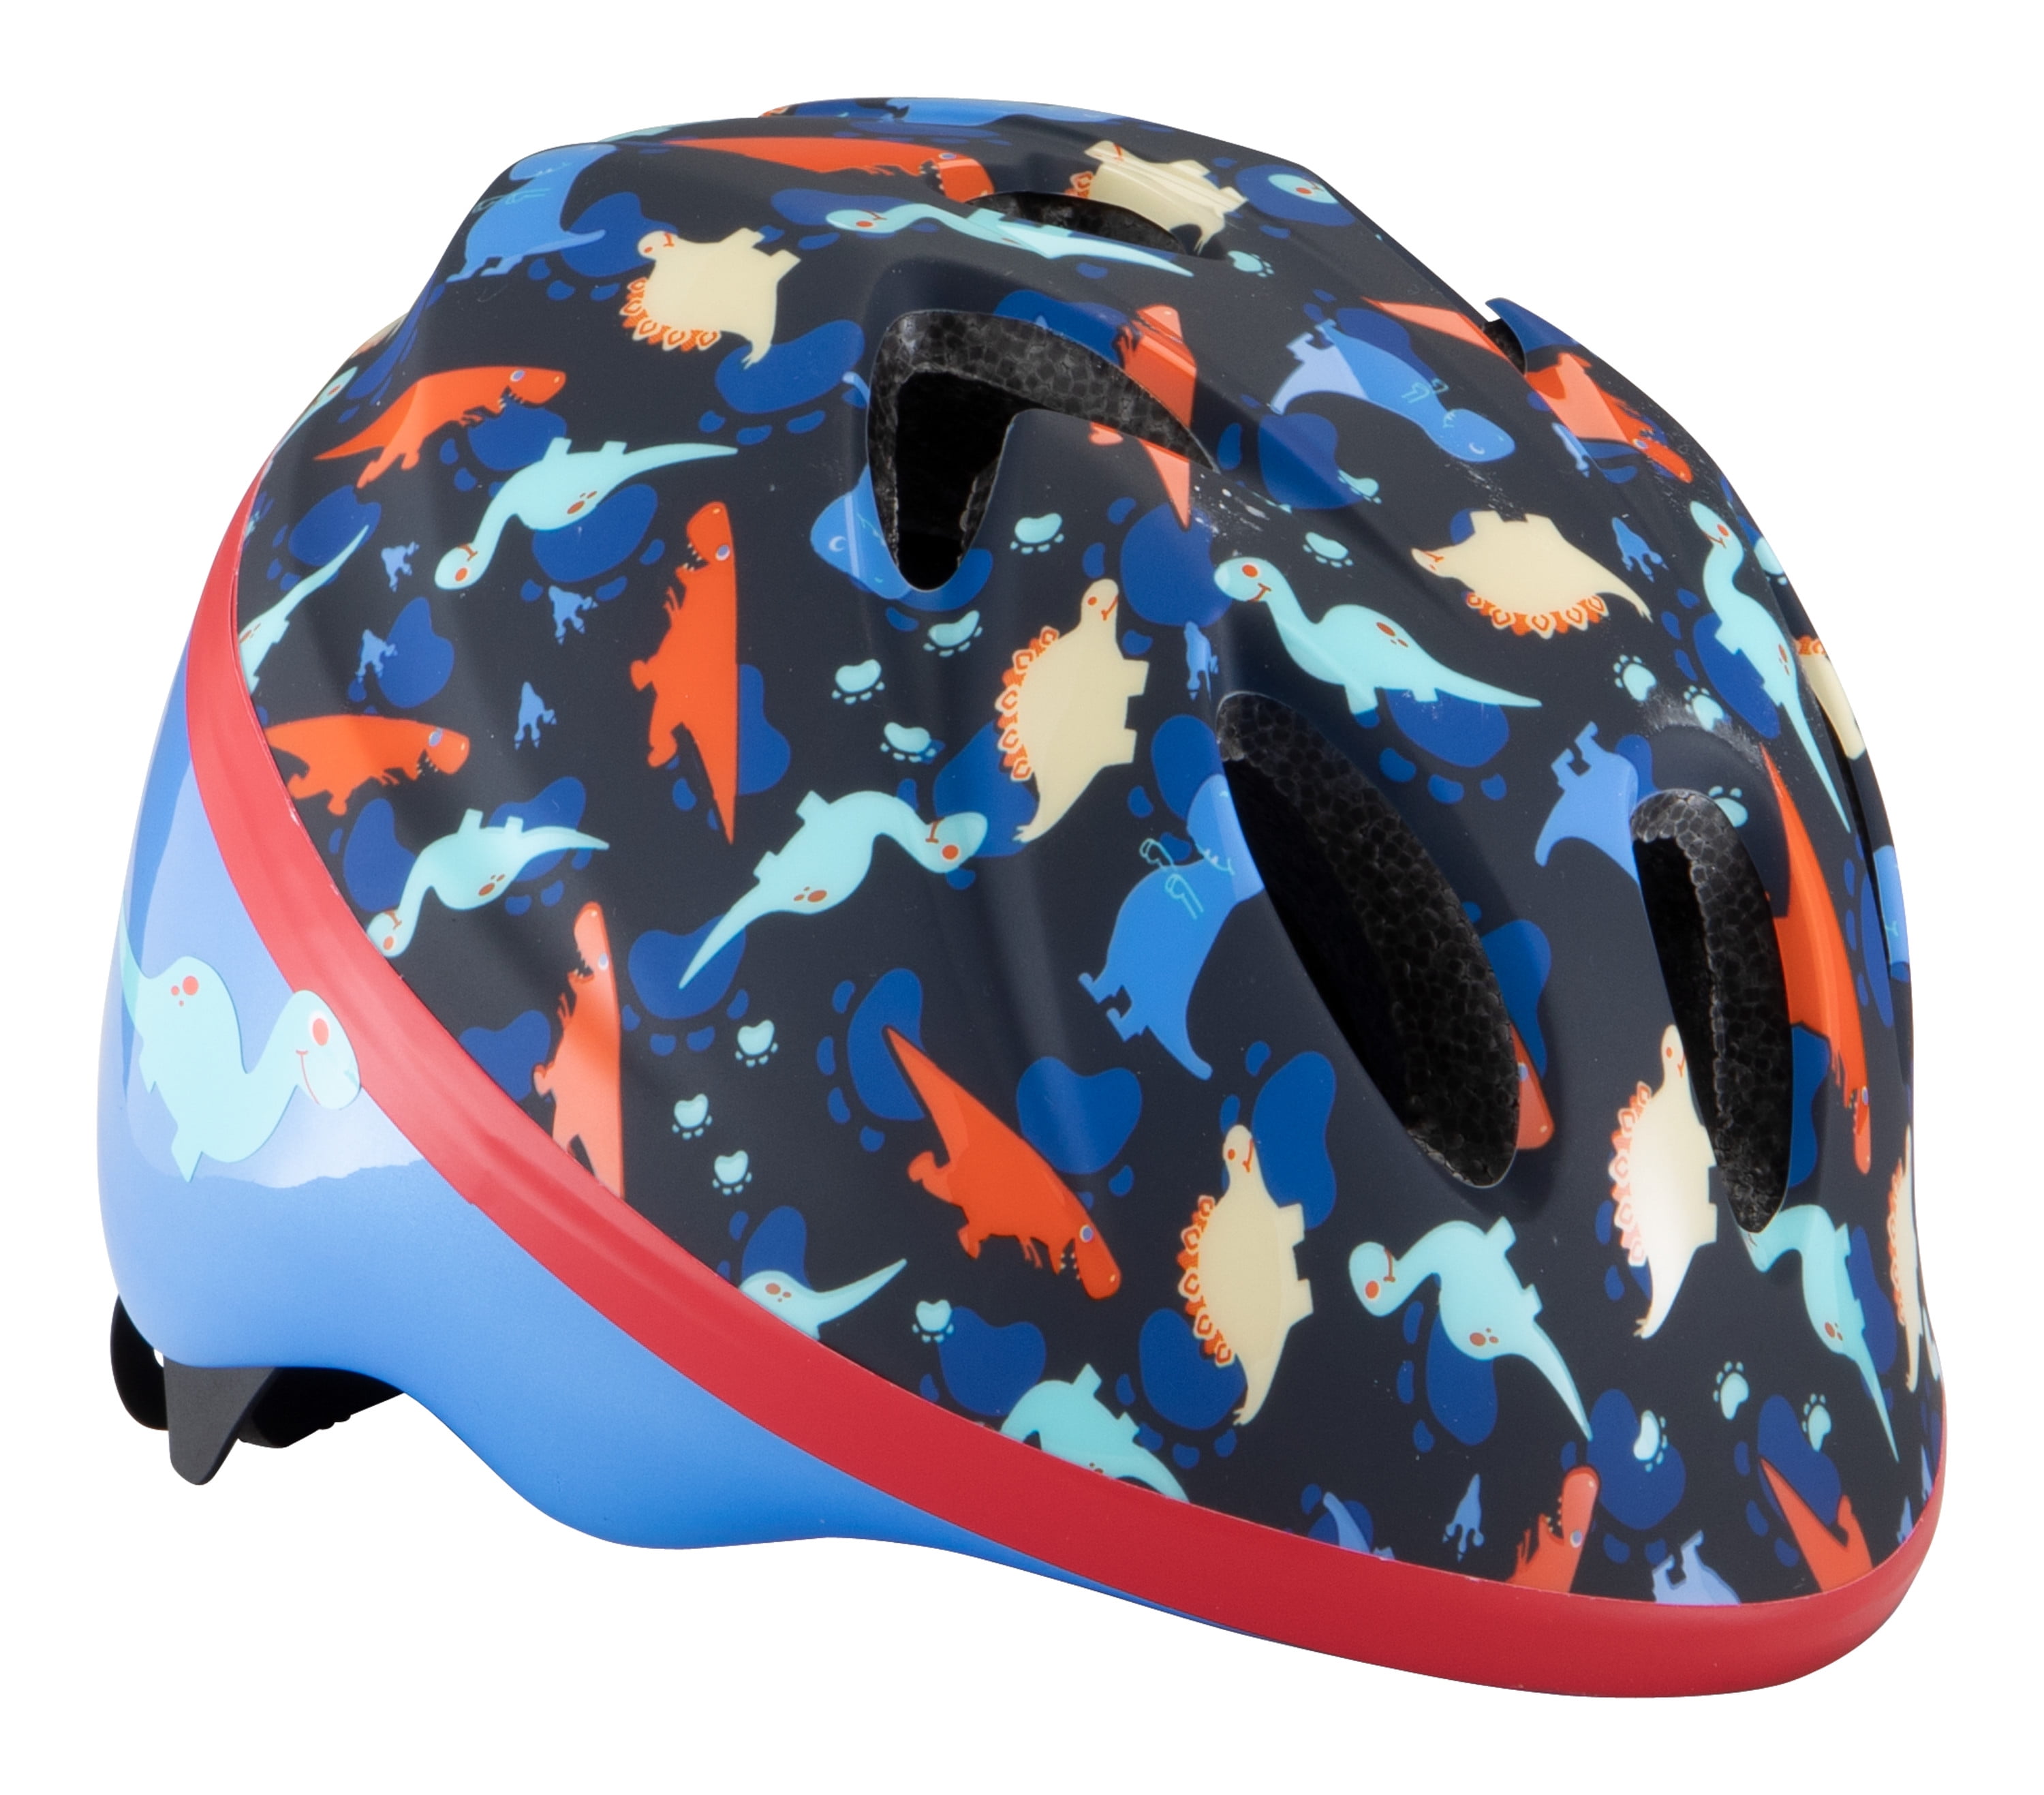 blue yellow NEW ages 3-5 Nickelodeon's PAW Patrol Toddler Bicycle Helmet